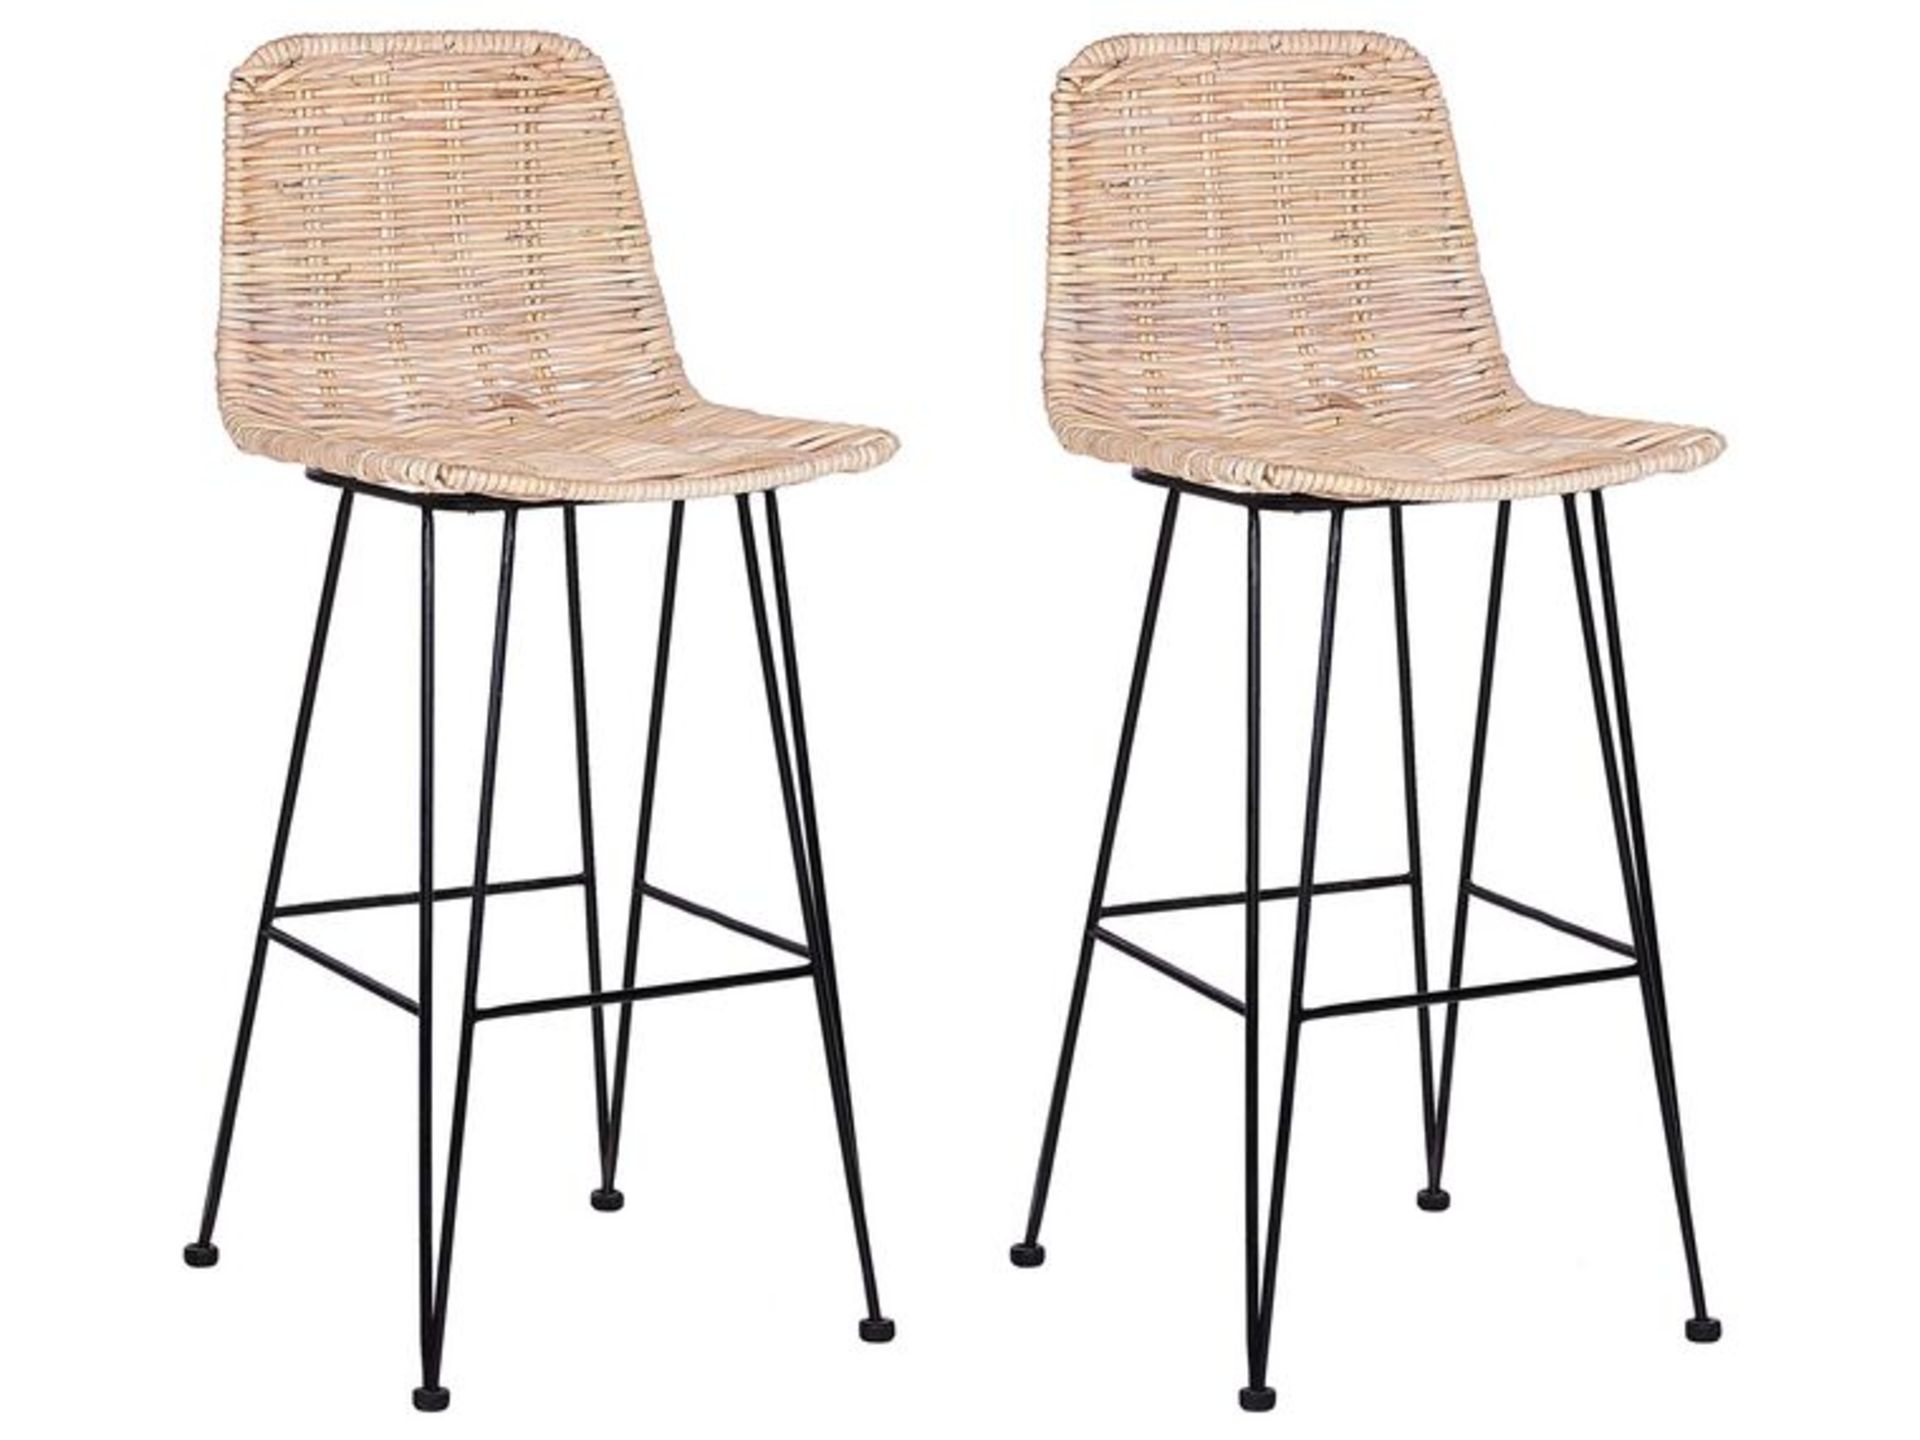 Cassita Set of 2 Rattan Bar Chairs Natural. - ER. Upgrade the looks of your home, and introduce some